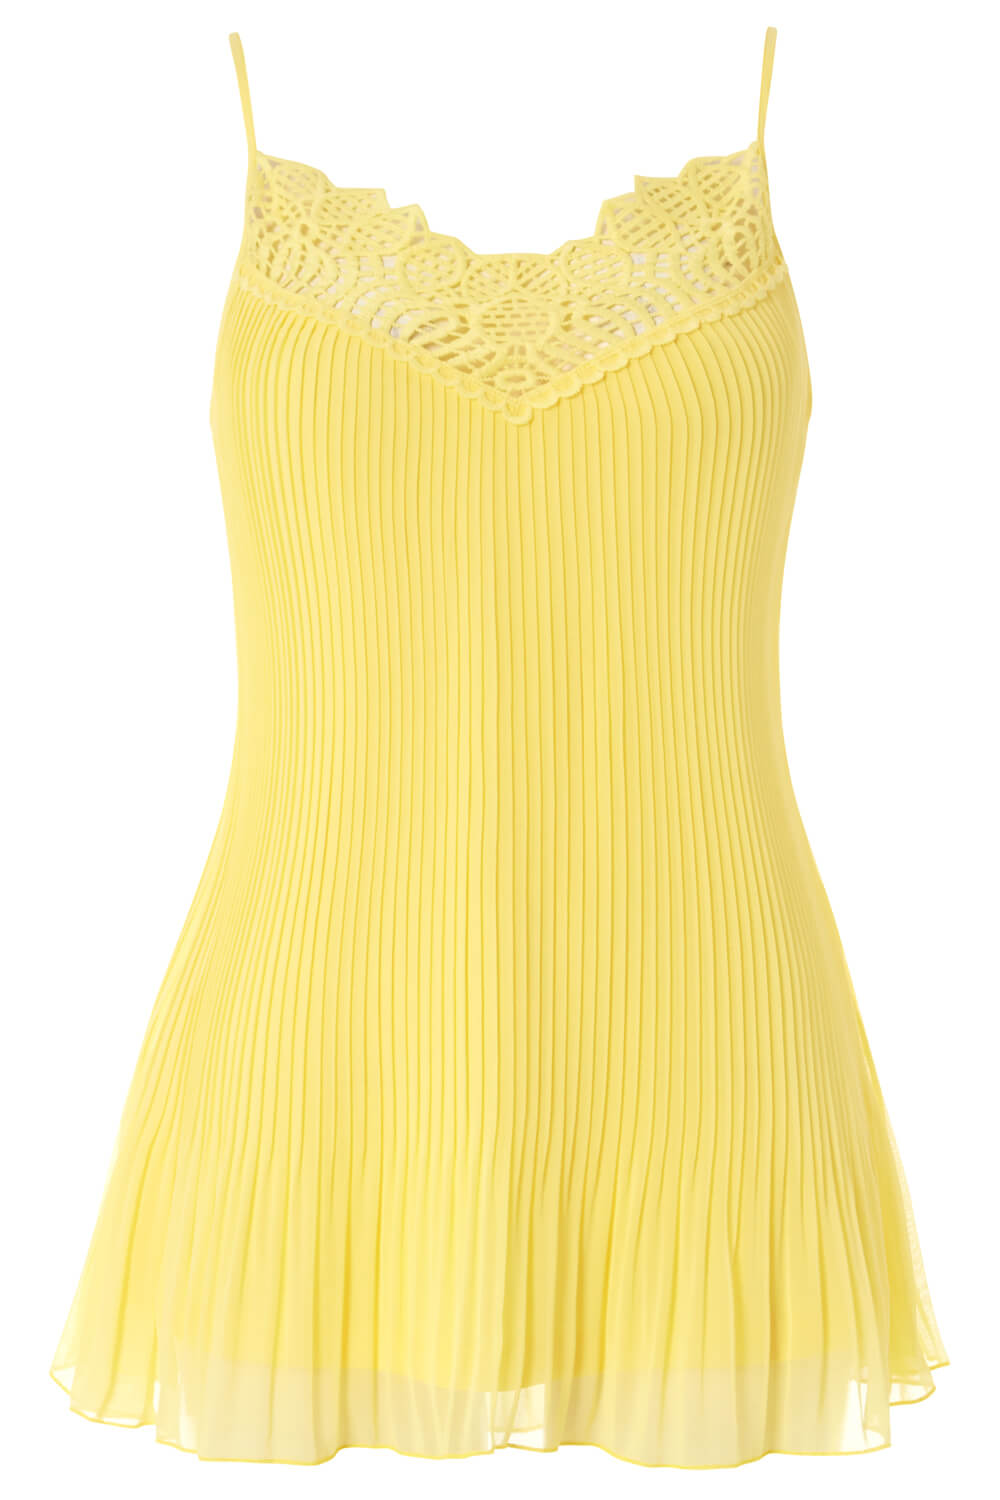 Yellow Pleated Lace Trim Cami Top, Image 5 of 5